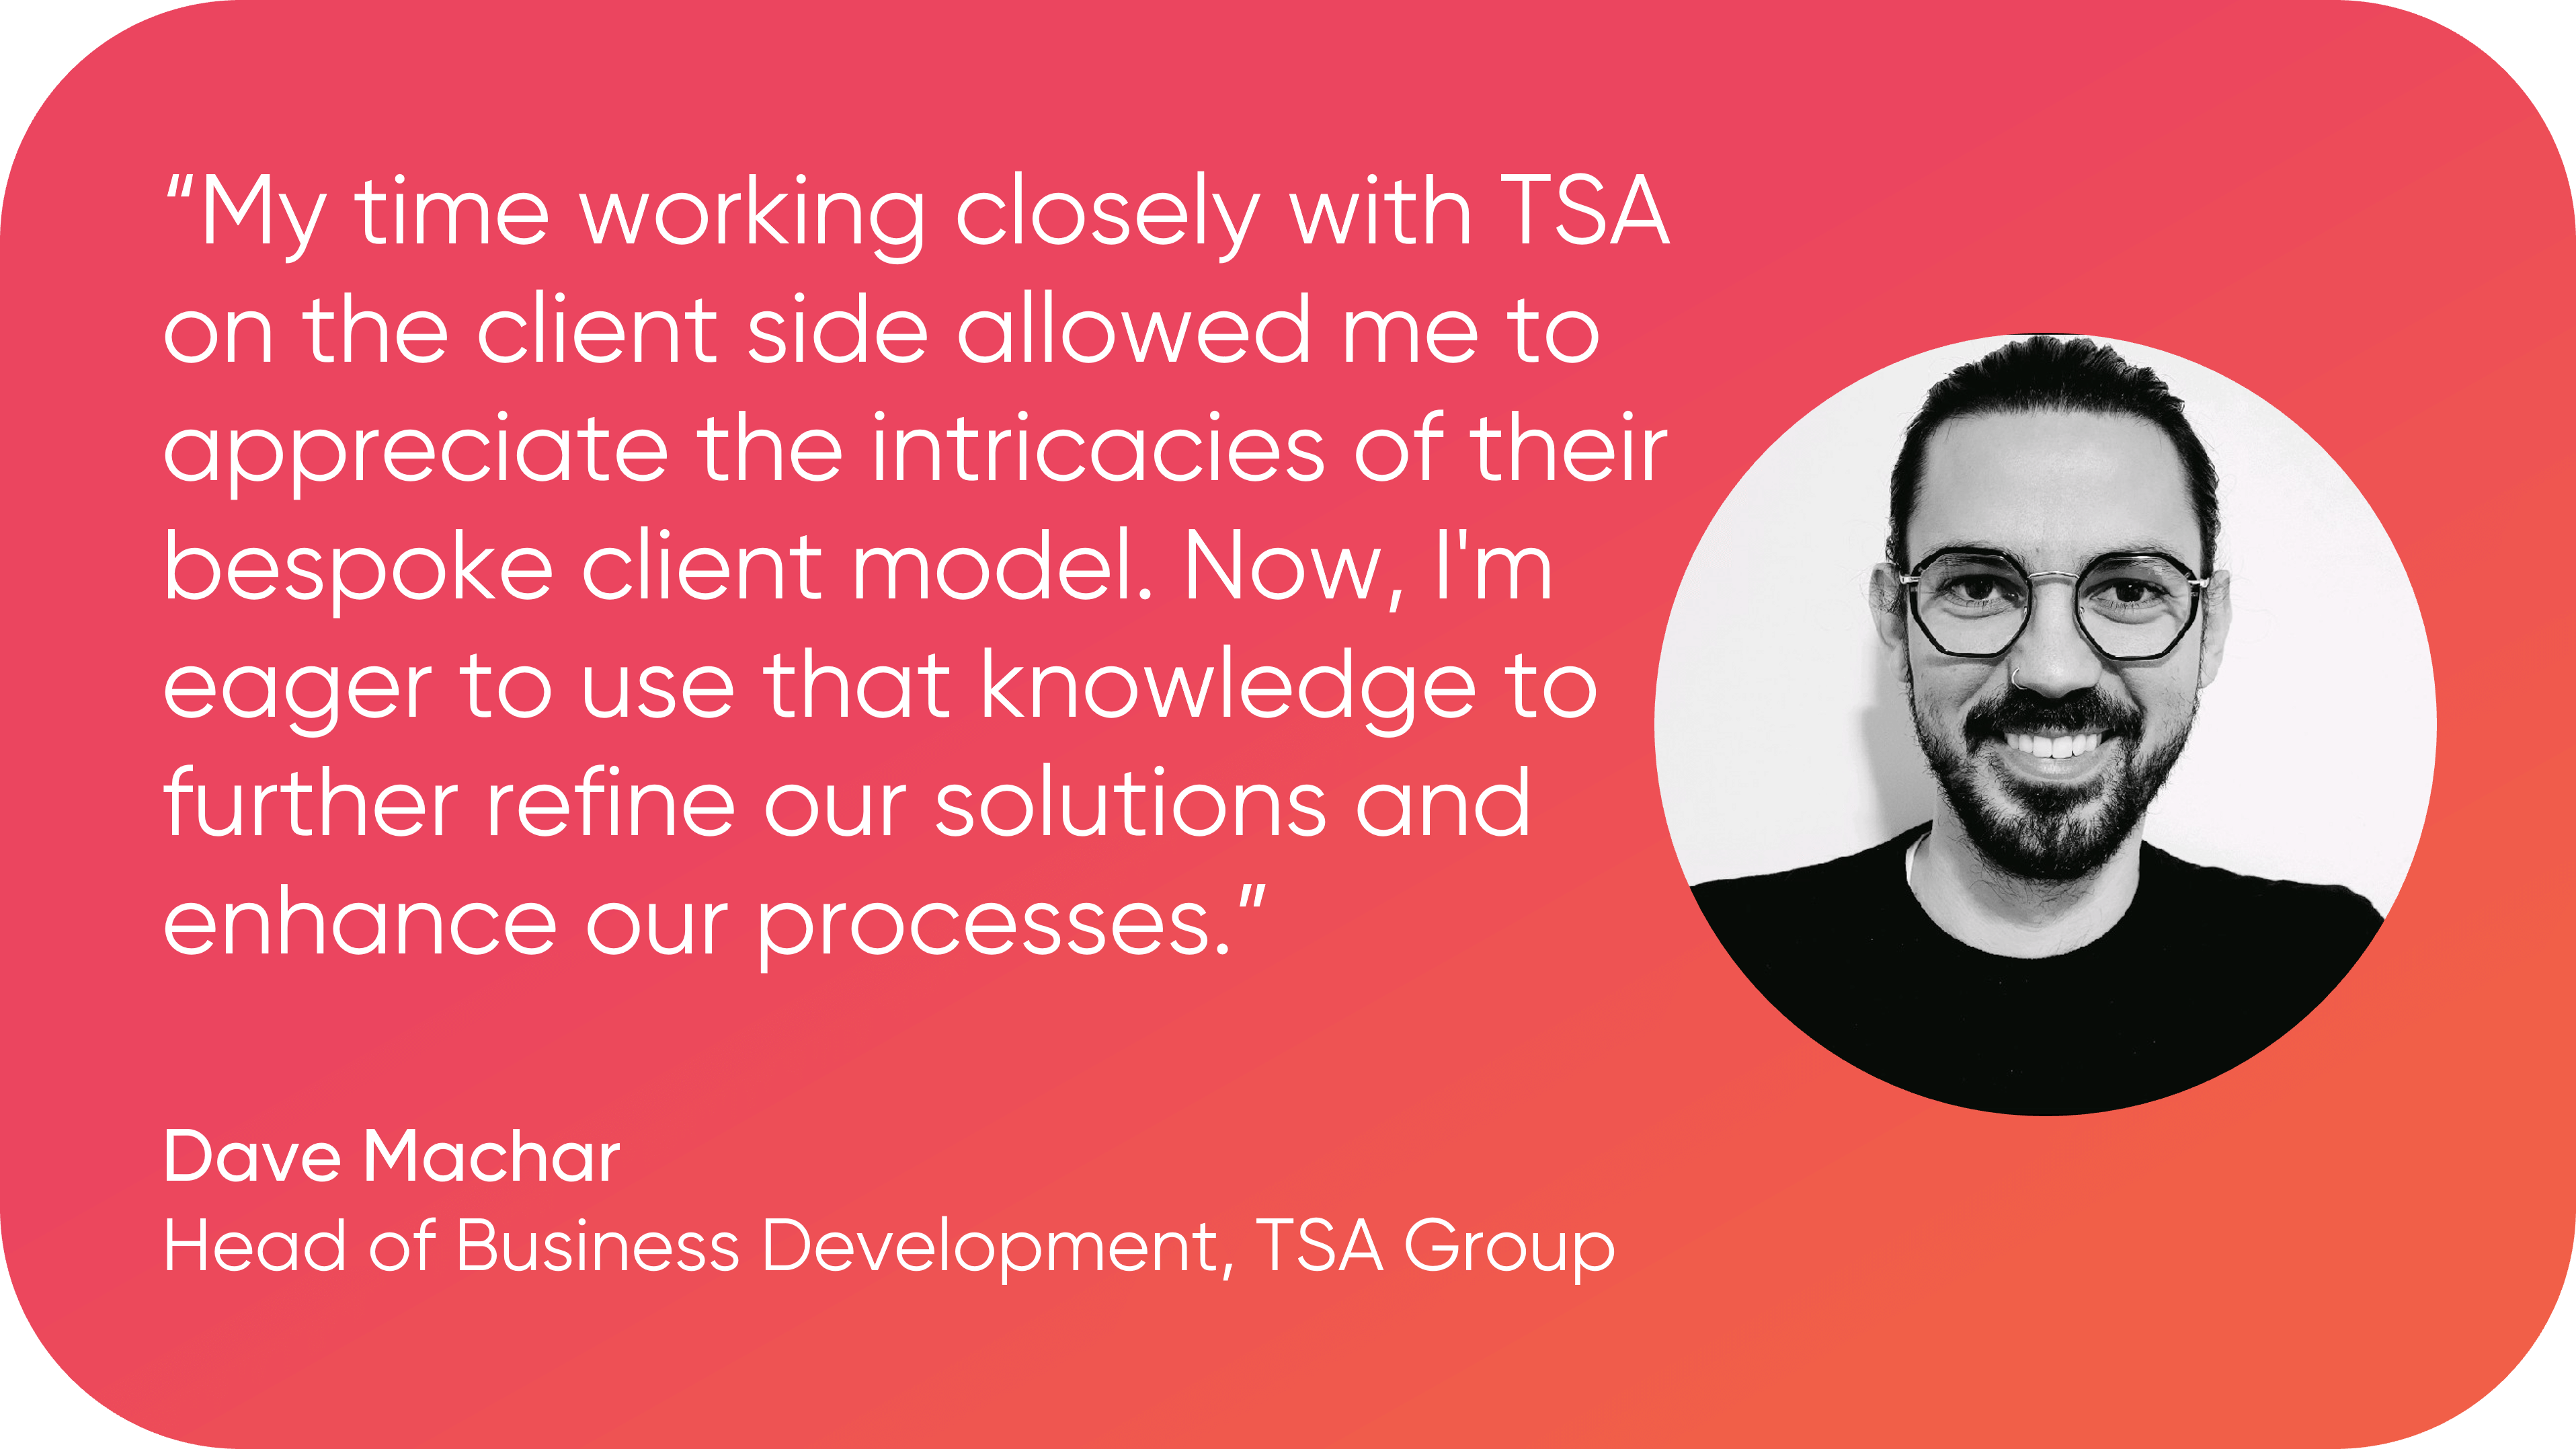 A black and white headshot of Dave Machar with a quote that reads 'My time working closely with TSA on the client side allowed me to appreciate the intricacies of their bespoke client model. Now, I'm eager to use that knowledge to further refine our solutions and enhance our processes."